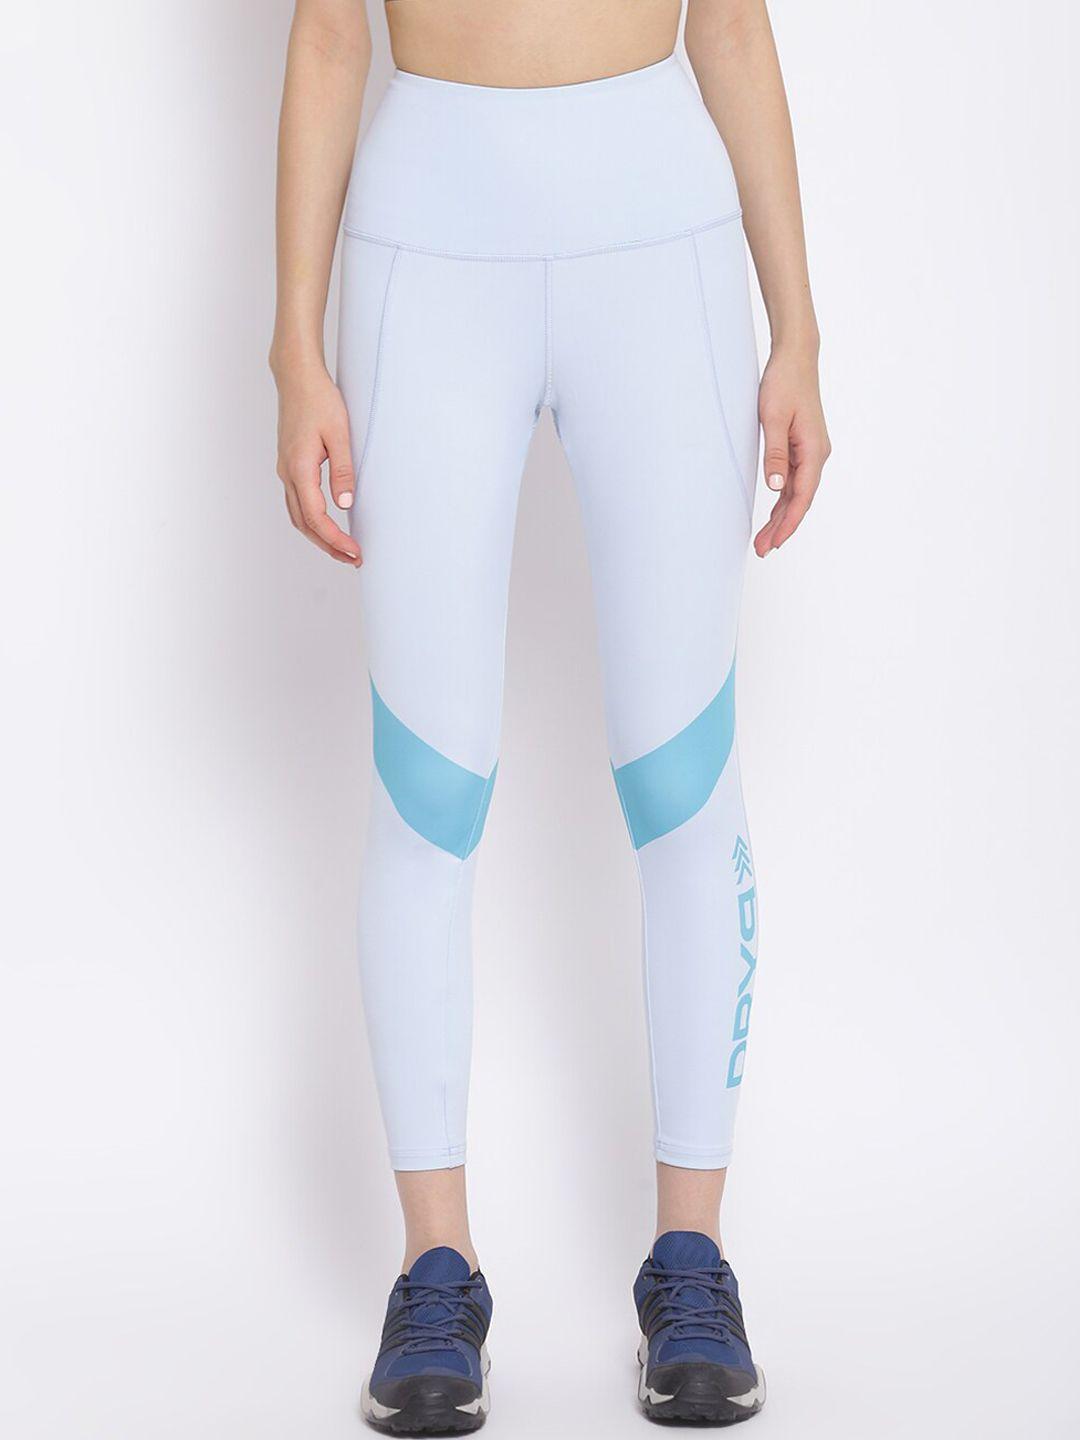 dryp evolut women turquoise blue printed polyester training or gym tights